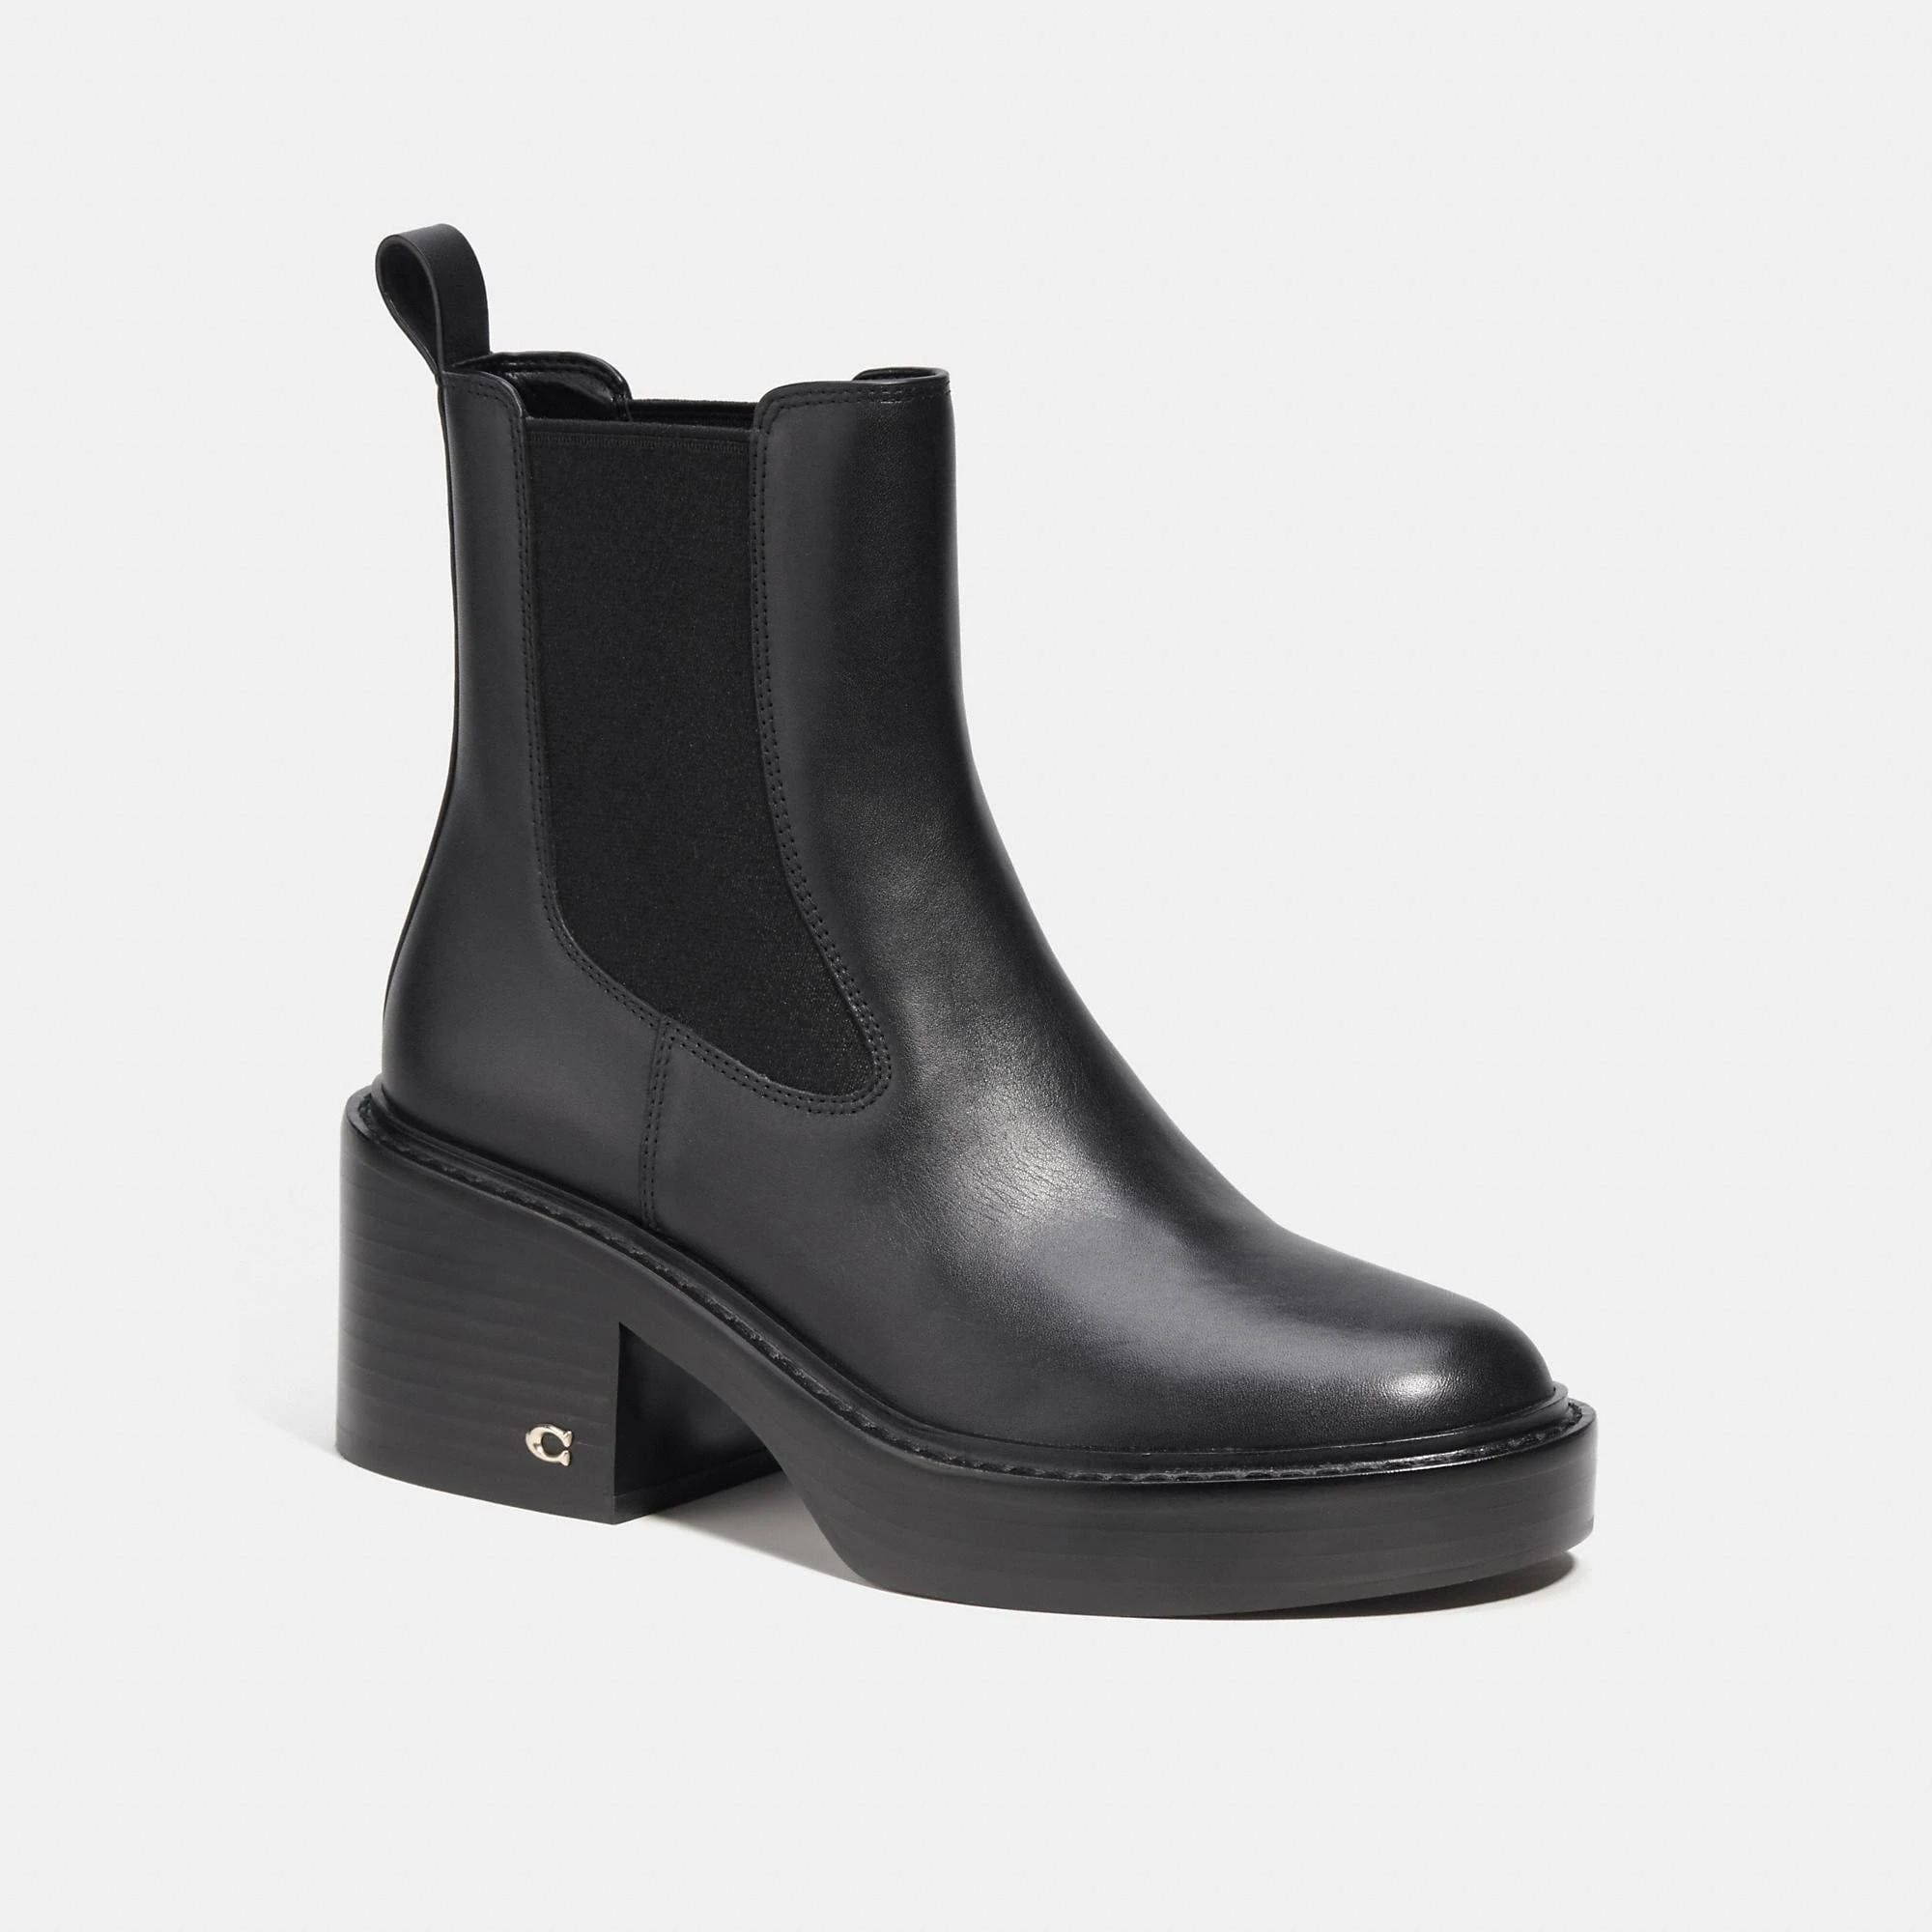 Coach Outlet Black Ankle Boots with Elastic Gore and Classic Styling | Image